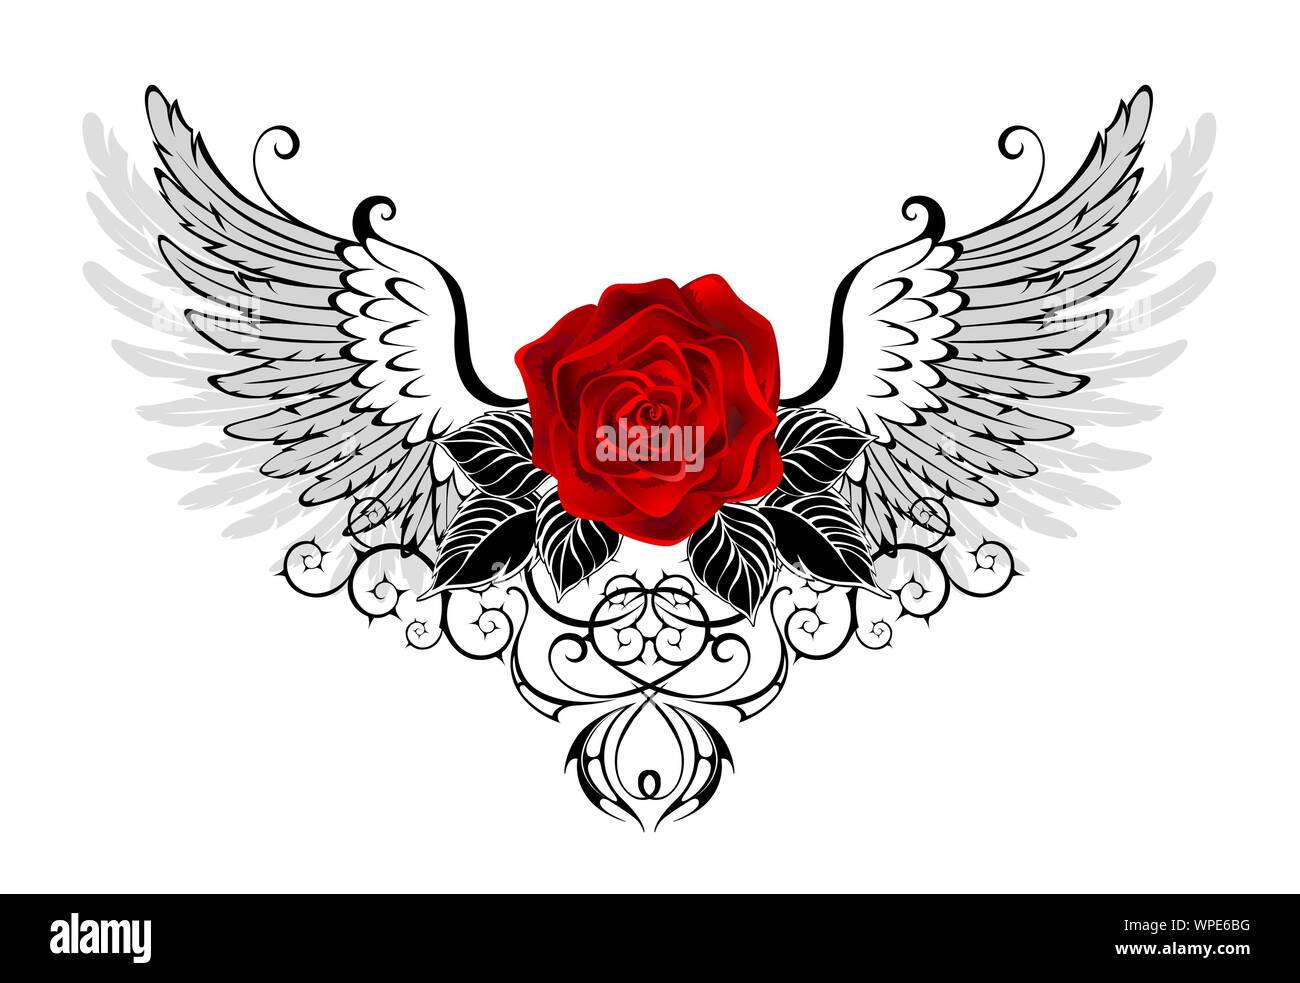 Red, blooming rose with gray, contoured angel wings, decorated with  black pattern on white background. Stock Vector